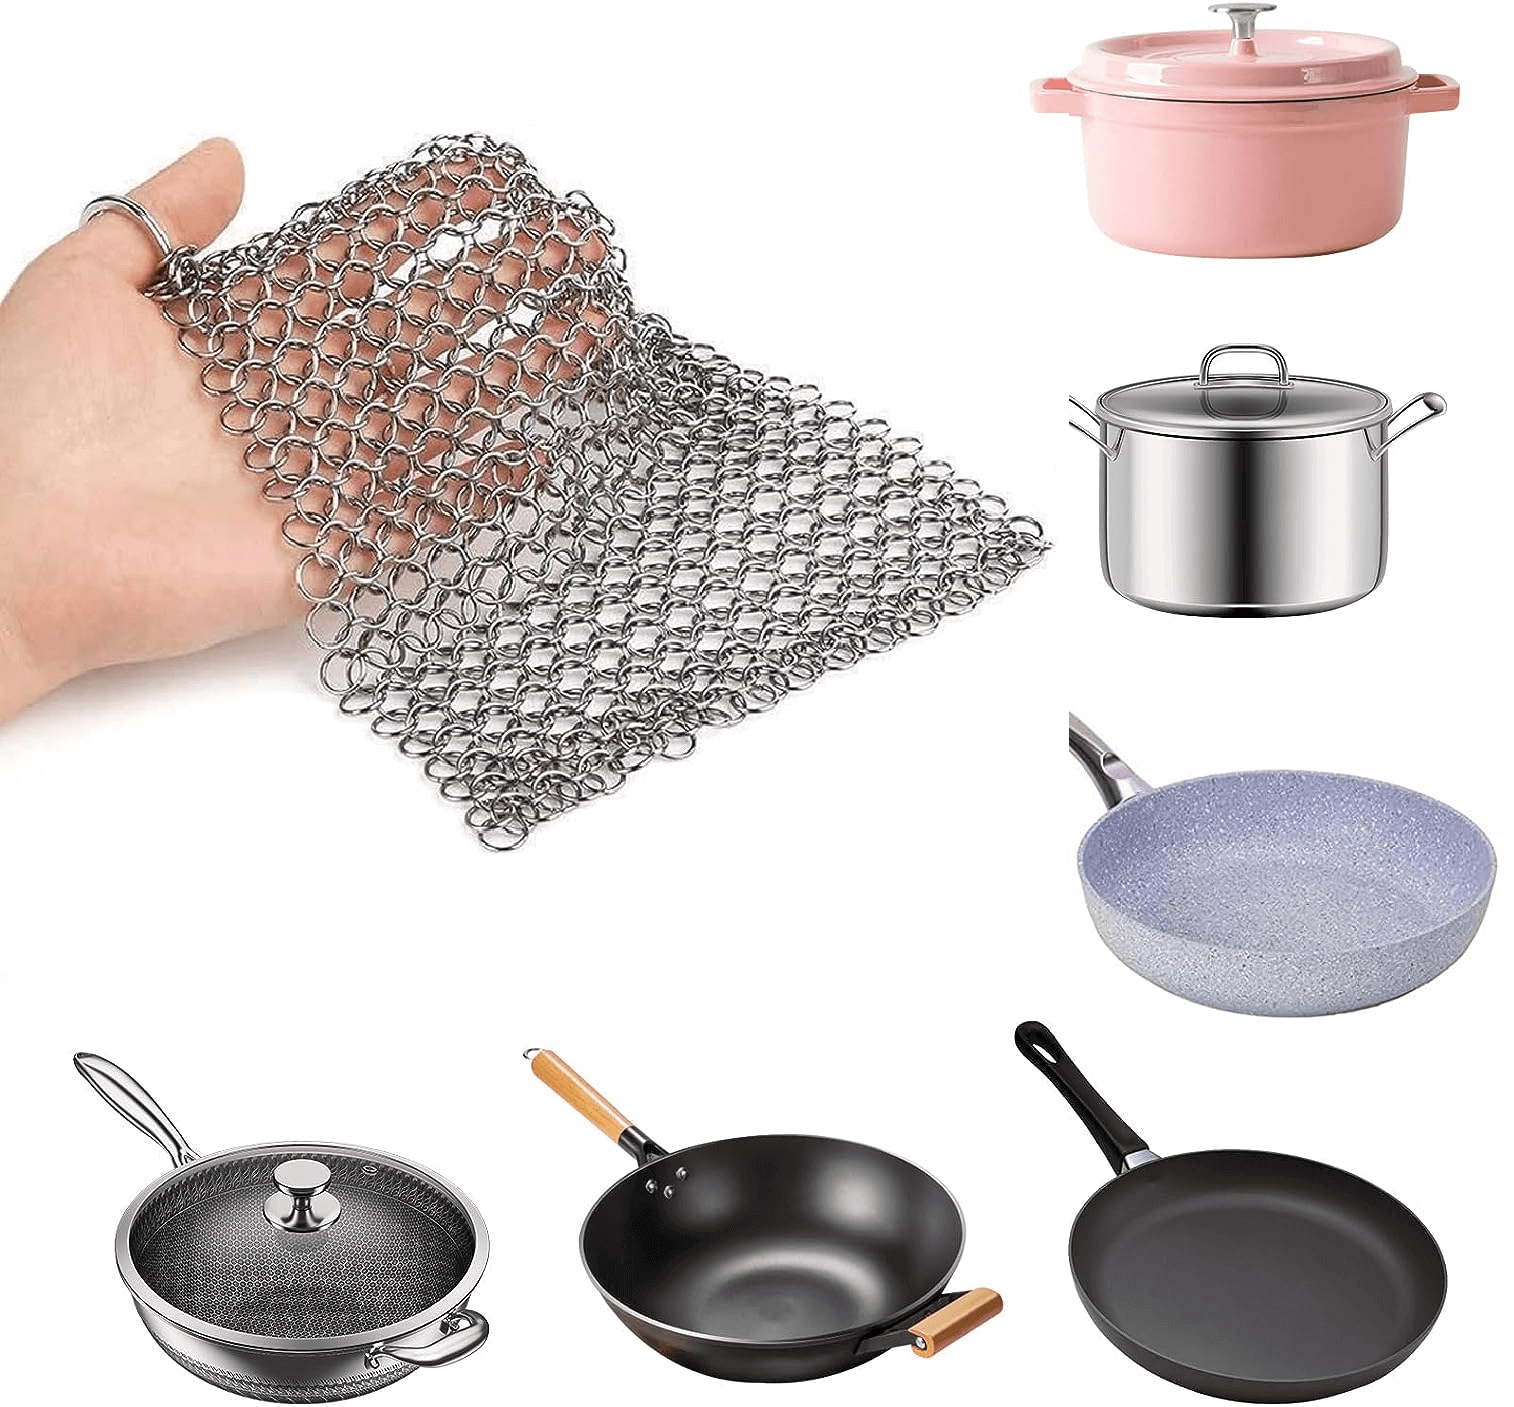 https://topkitchengadget.com/wp-content/uploads/2020/05/the-ringer-cast-iron-cleaner-from-top-kitchen-gadget.png